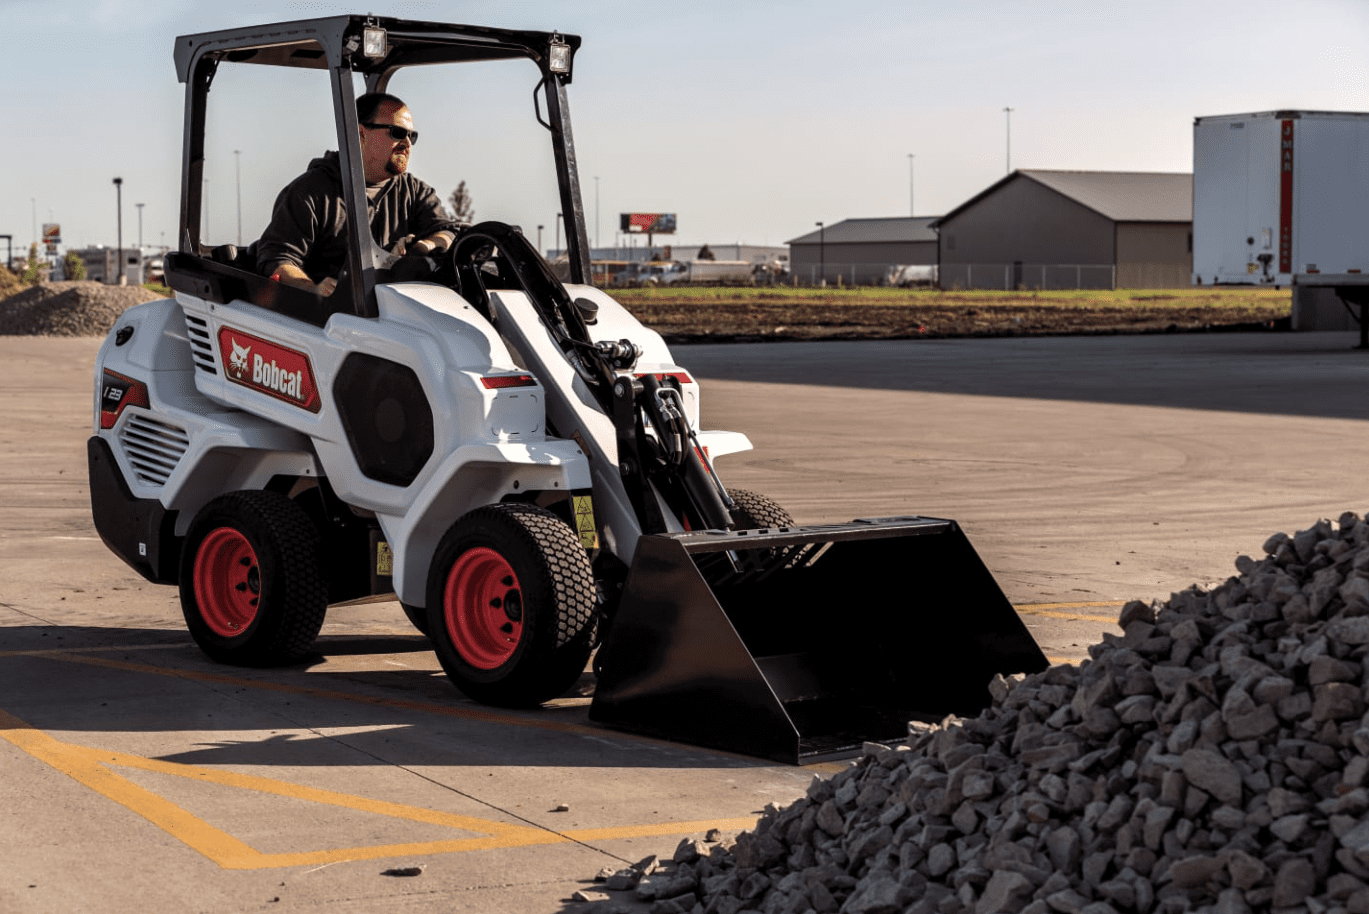 Browse Specs and more for the Bobcat L23 Small Articulated Loader - Bobcat of North Texas